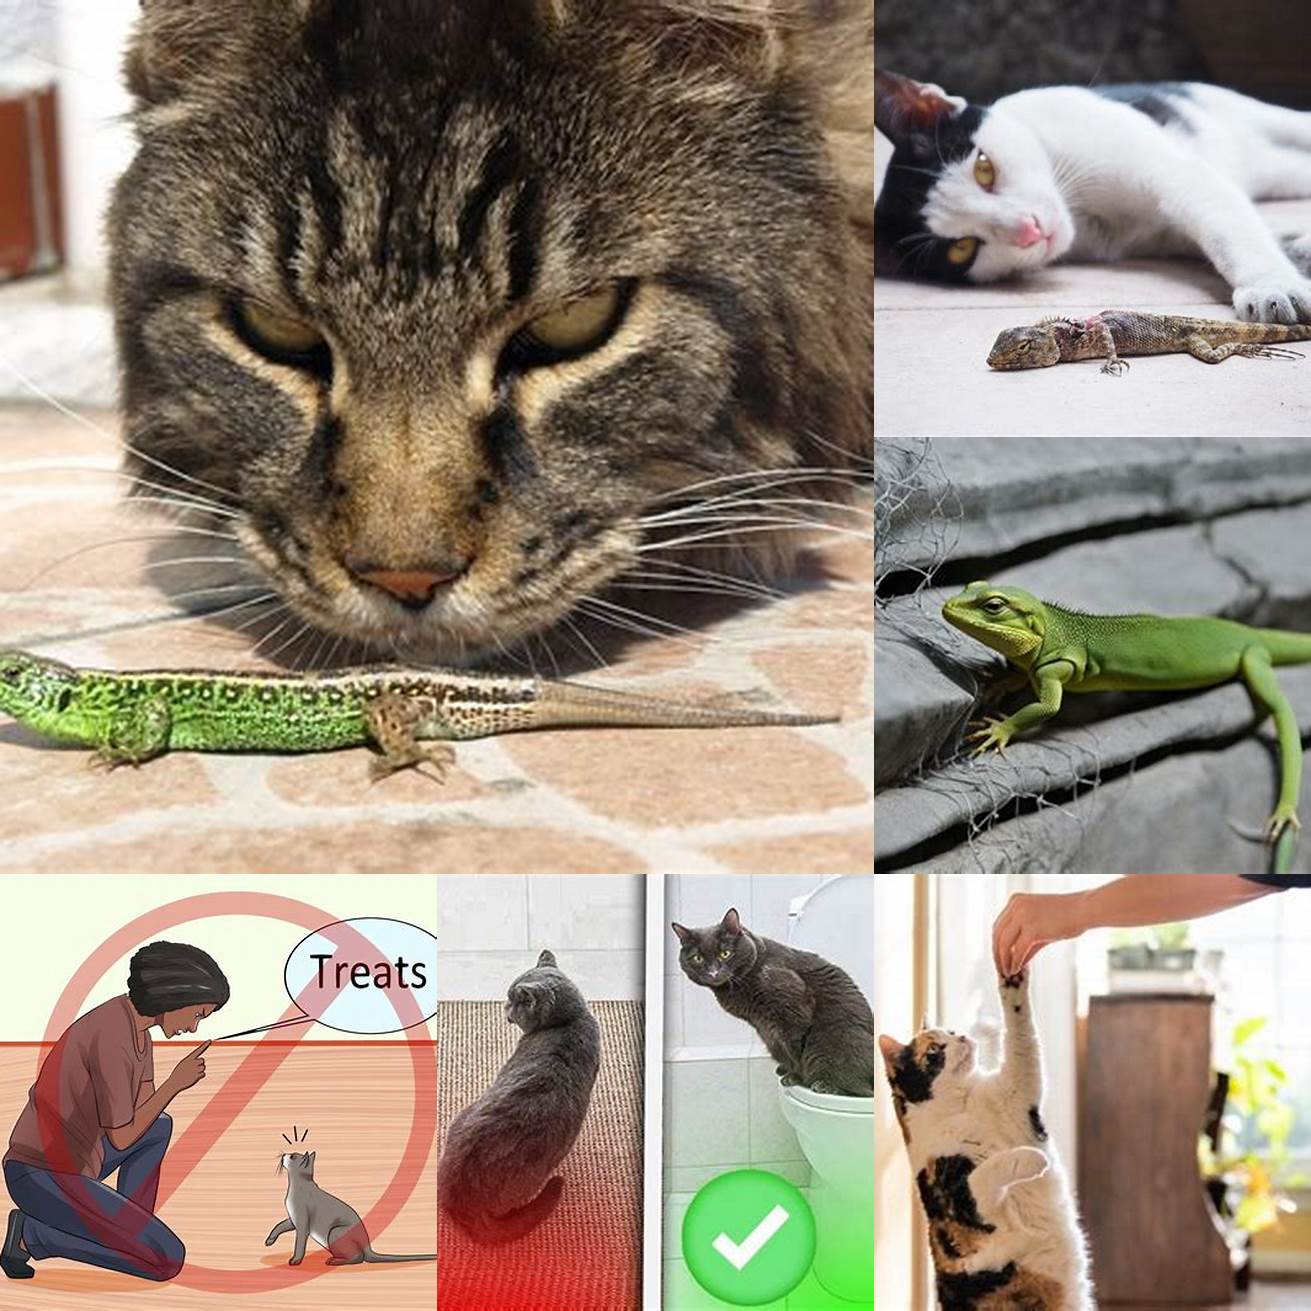 3 Train your cat to avoid lizards